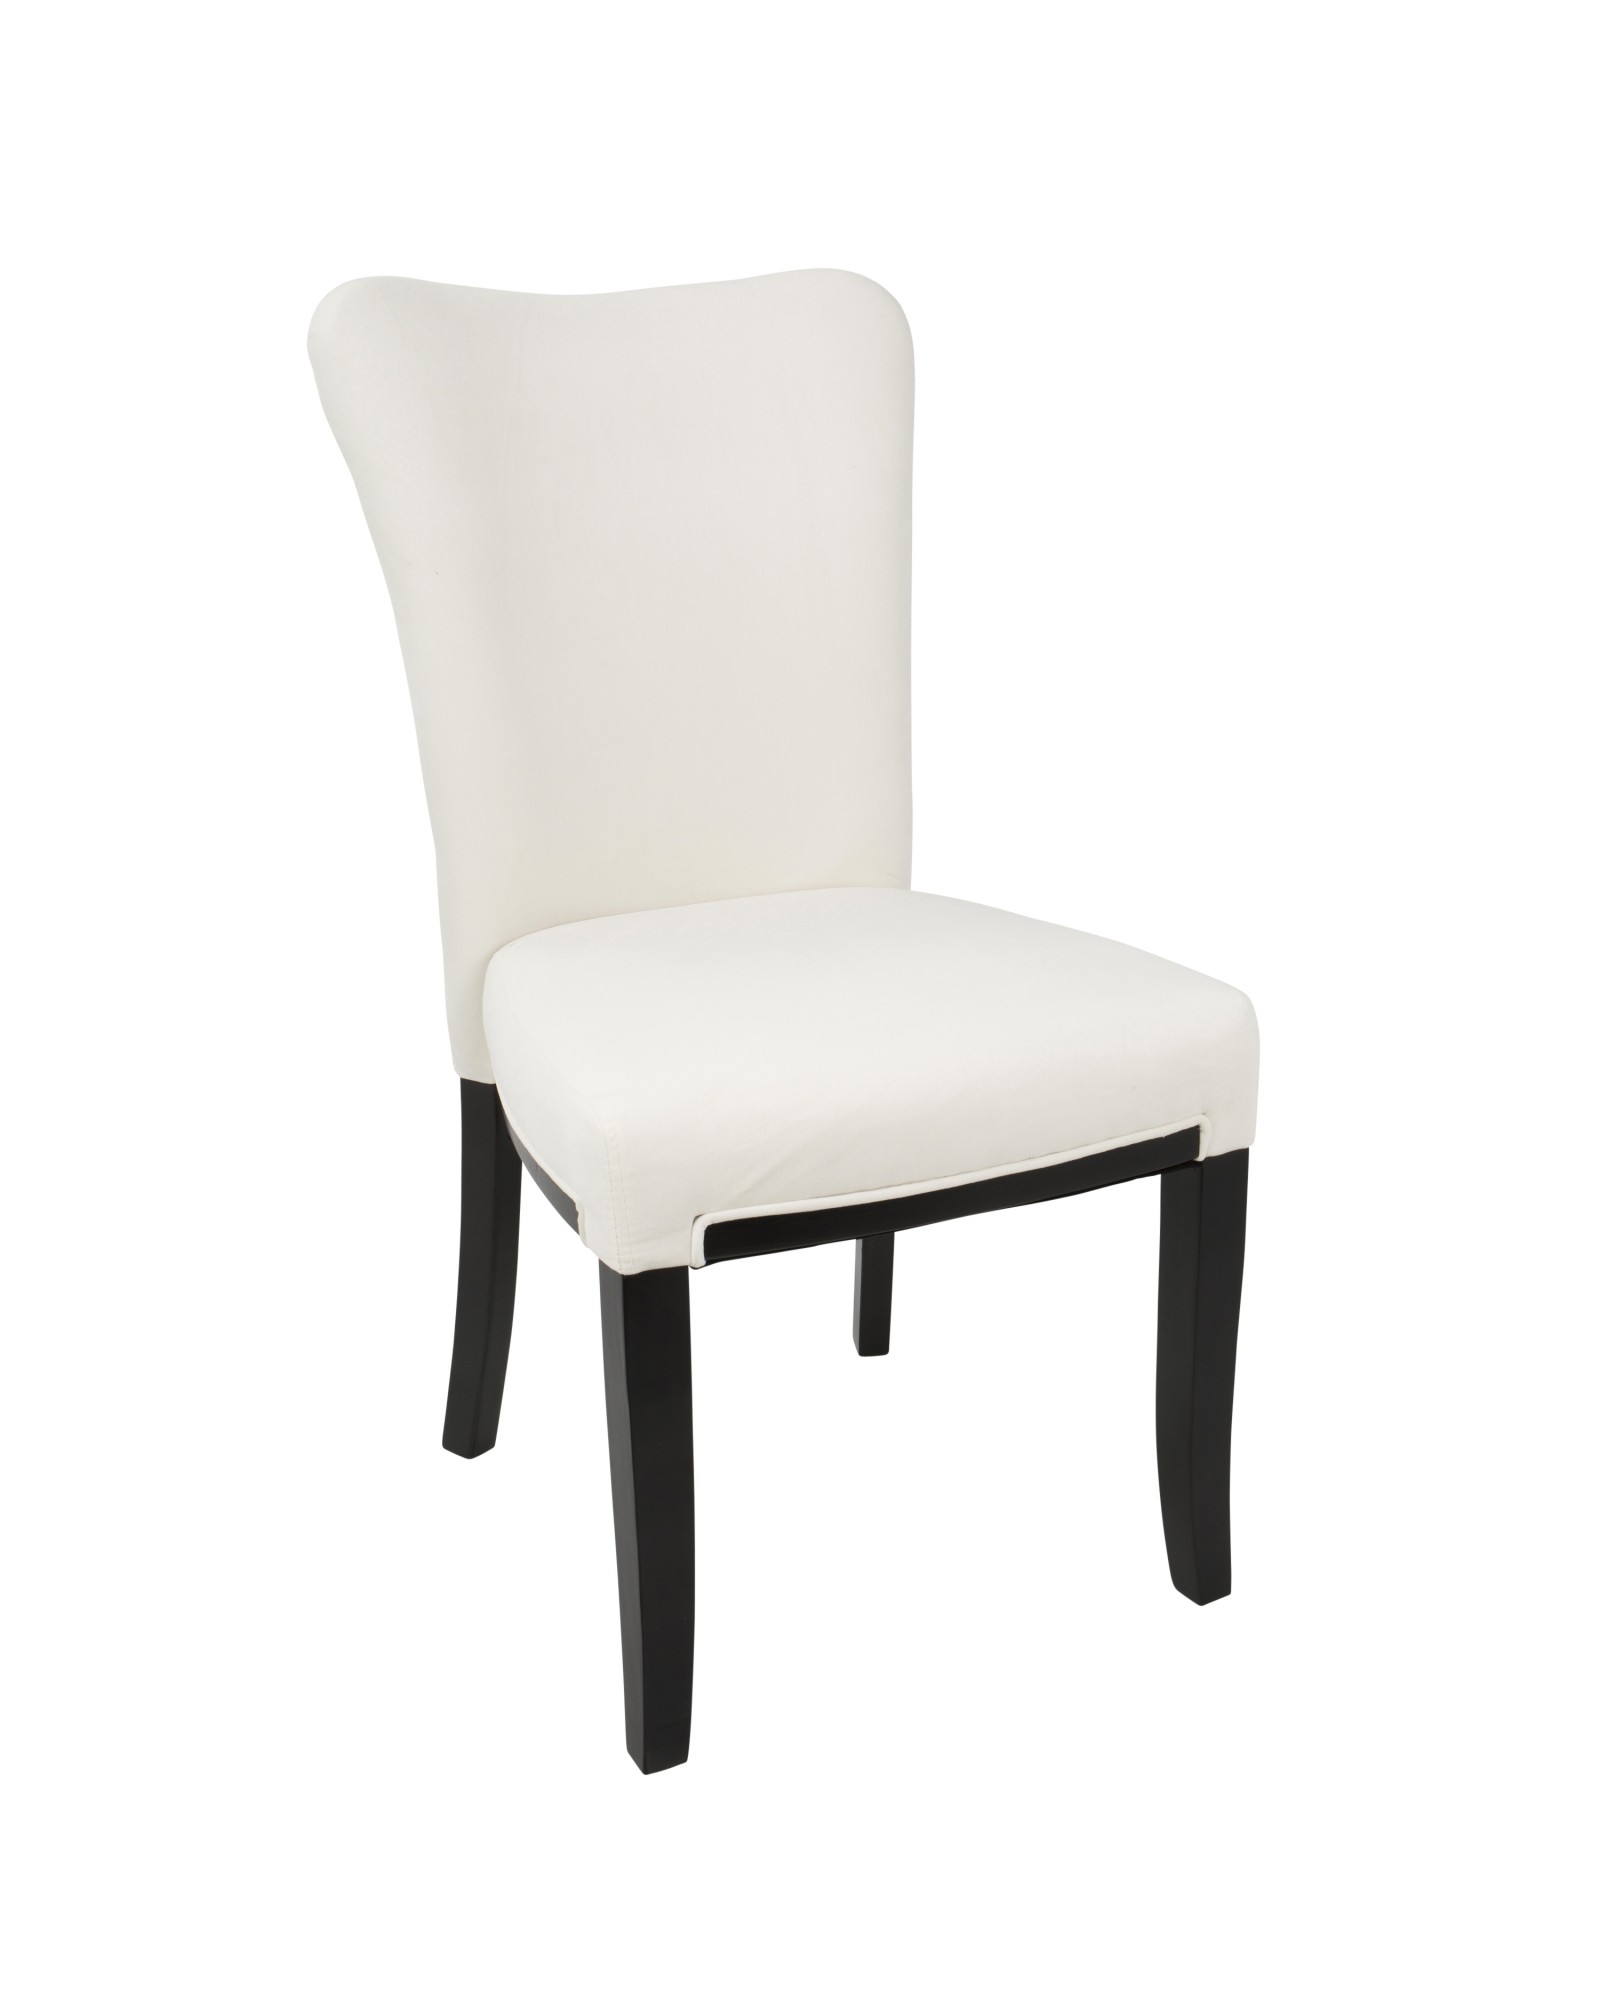 Olivia Contemporary Dining Chair in Espresso Wood and Cream Velvet - Set of 2